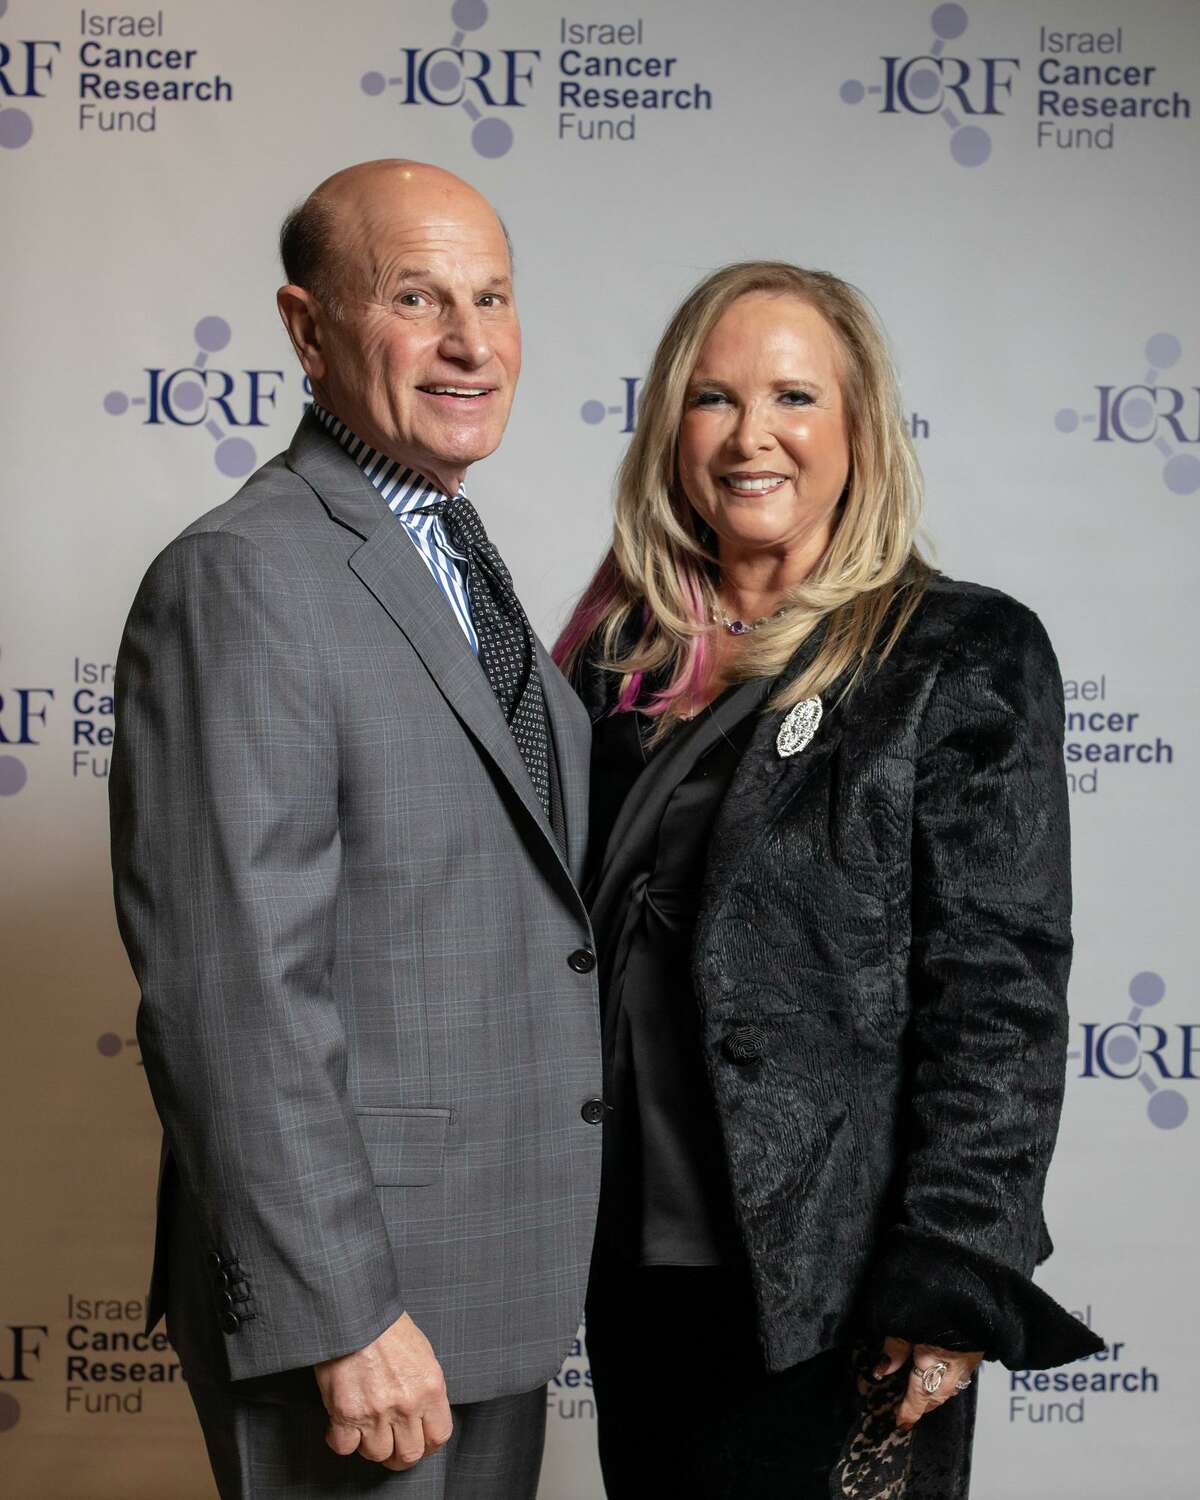 Stuart and Bran Berni at the fourth annual Heroes for Hope Gala, an event held by the Israel Cancer Research Fund last month at the Hilton Stamford. Berni, managing partner and CEO of the Berni Cos., was honored for his service.